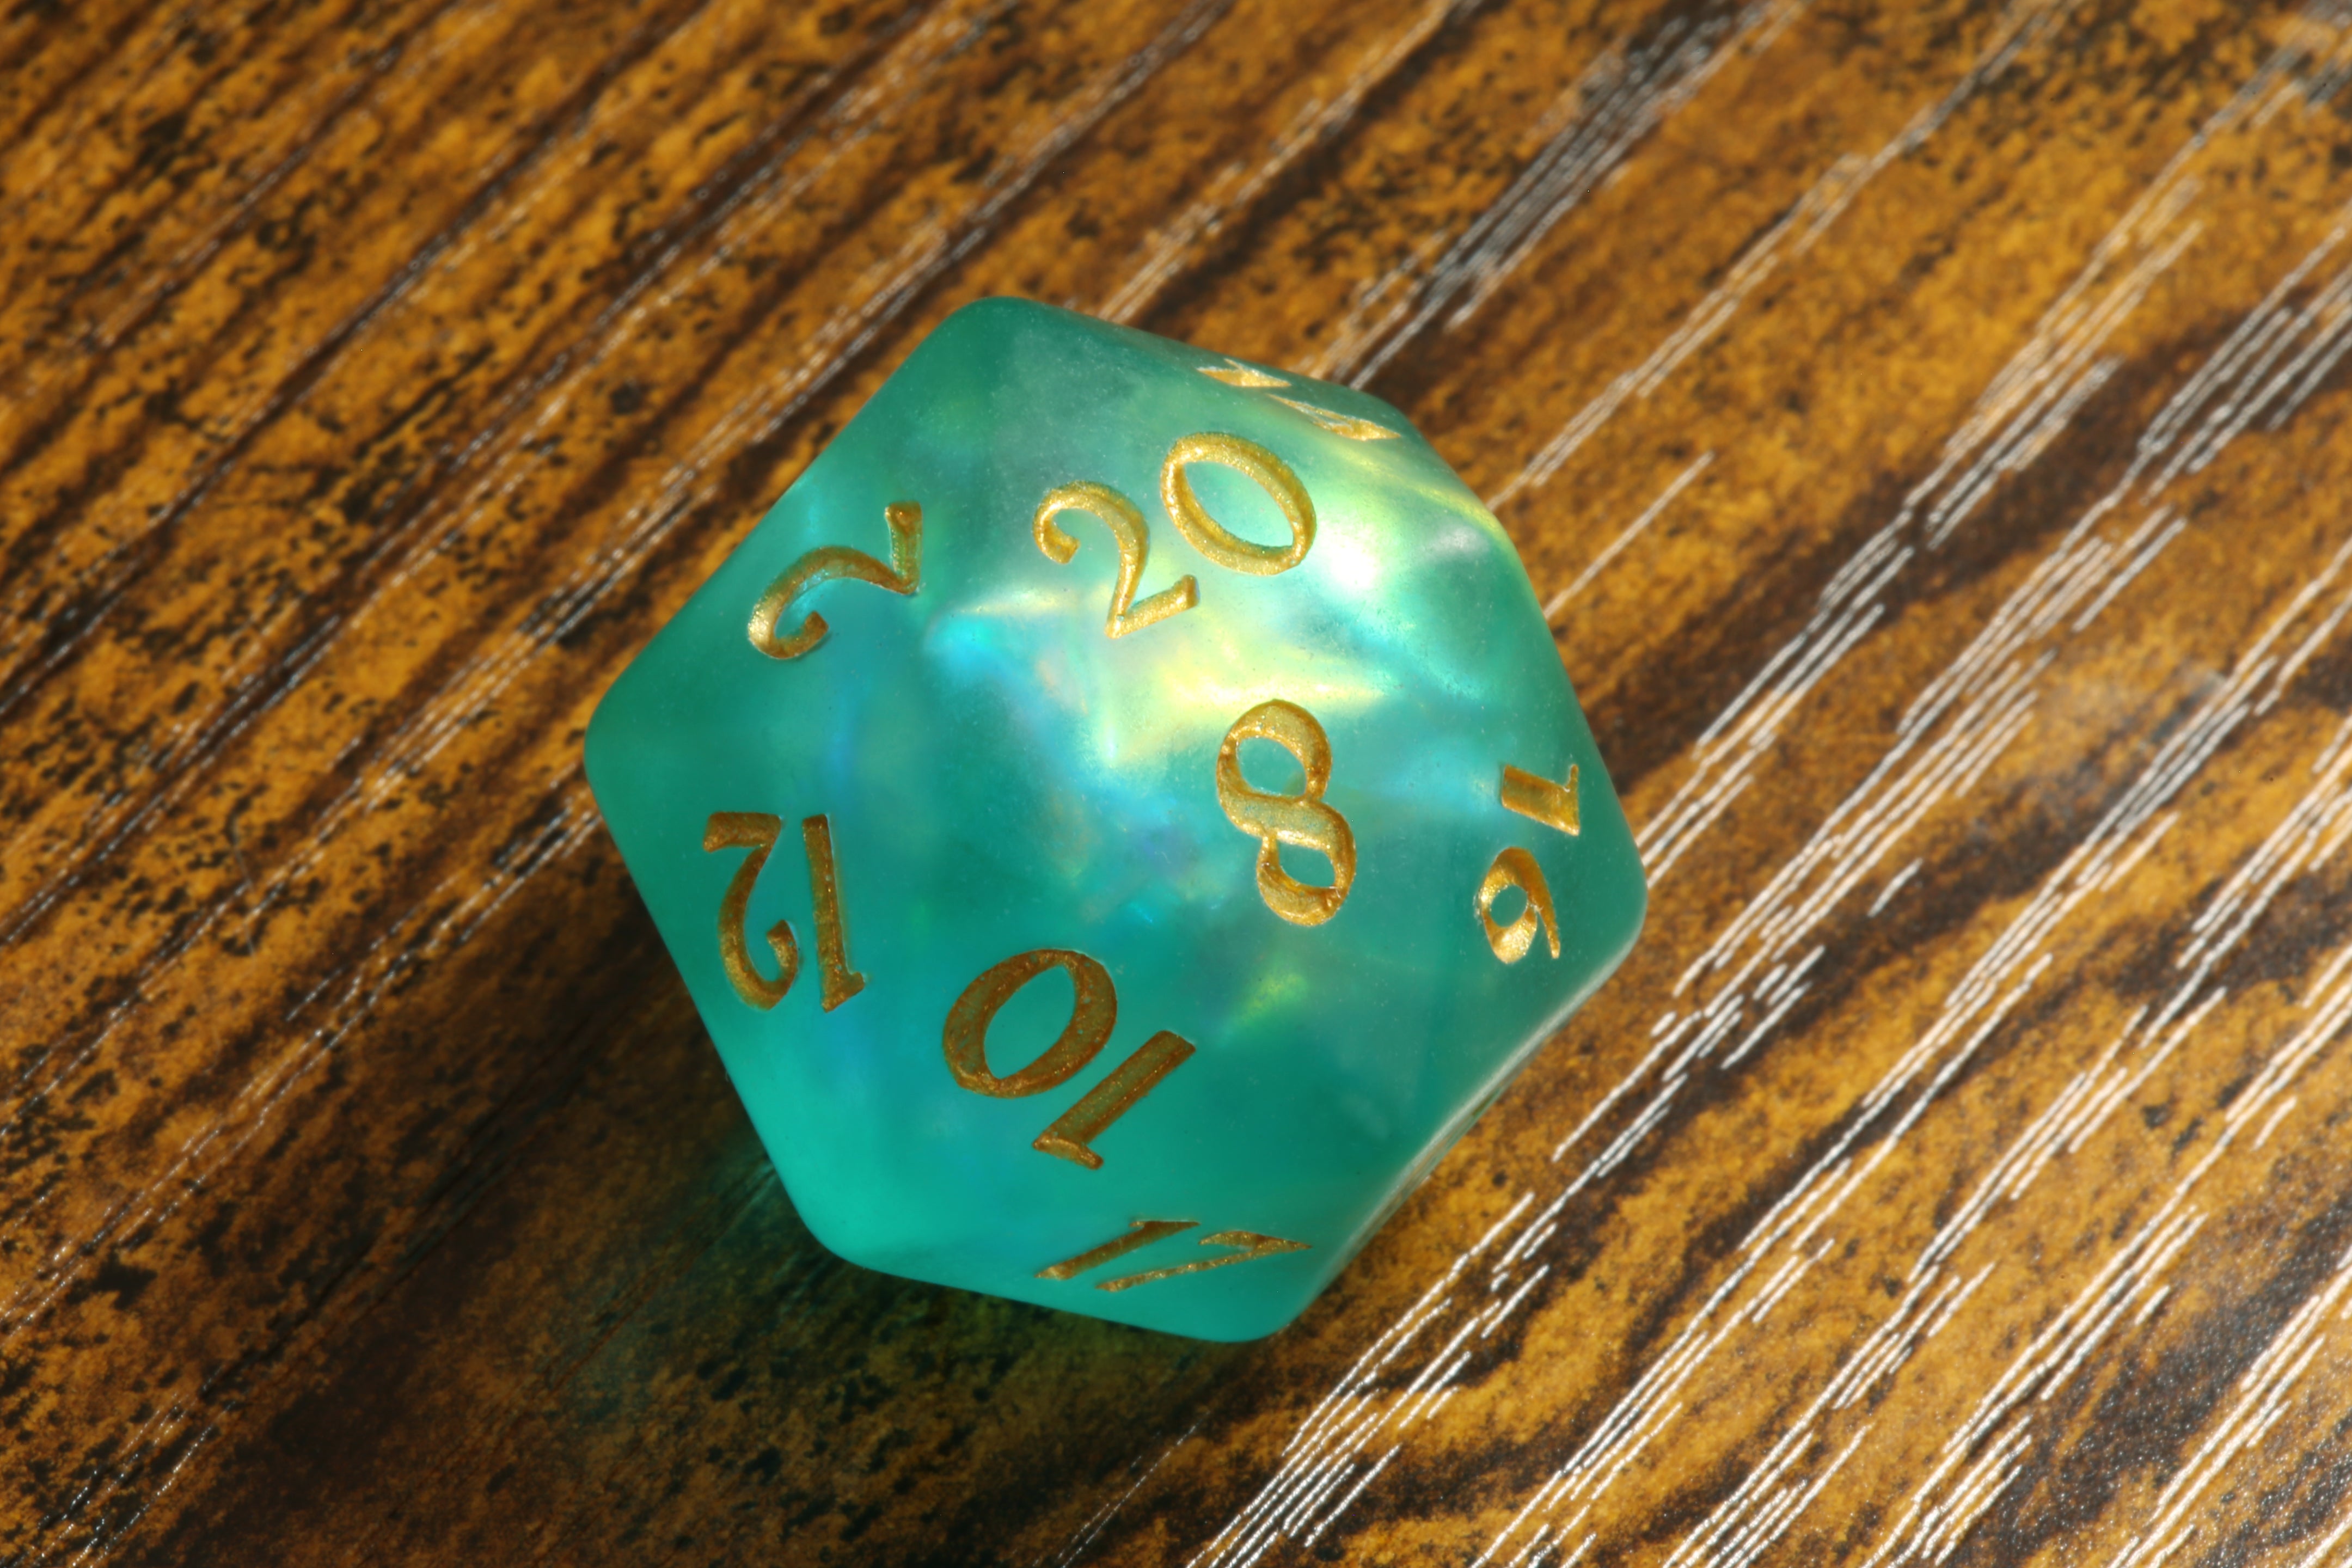 Mystical Opal Large D20 Dice collection - Extra Large D20 - The Wizard's Vault